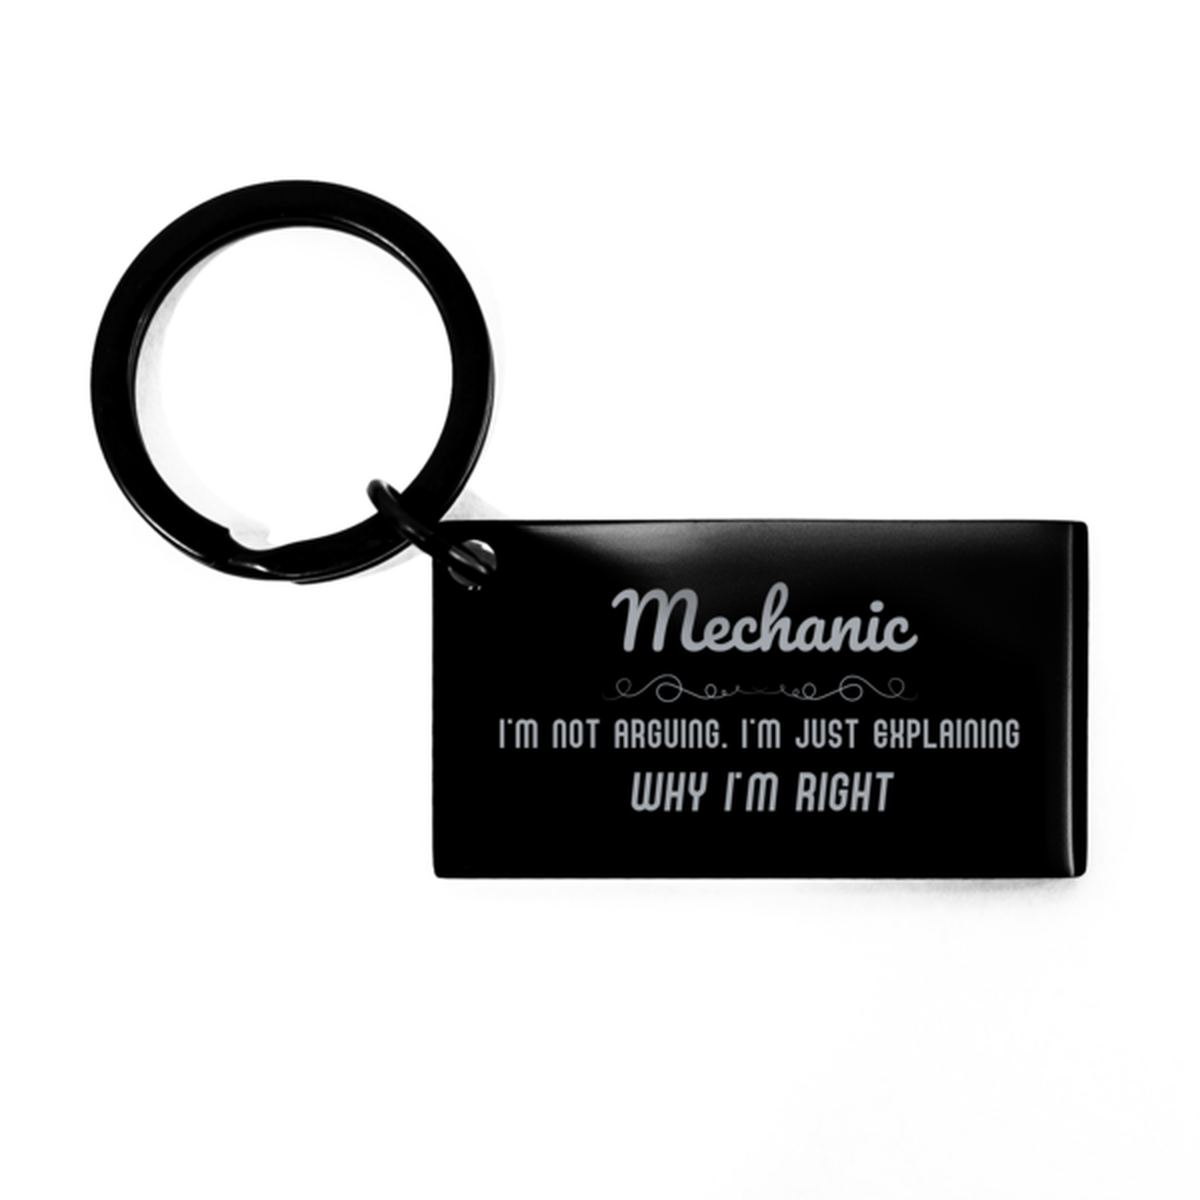 Mechanic I'm not Arguing. I'm Just Explaining Why I'm RIGHT Keychain, Funny Saying Quote Mechanic Gifts For Mechanic Graduation Birthday Christmas Gifts for Men Women Coworker